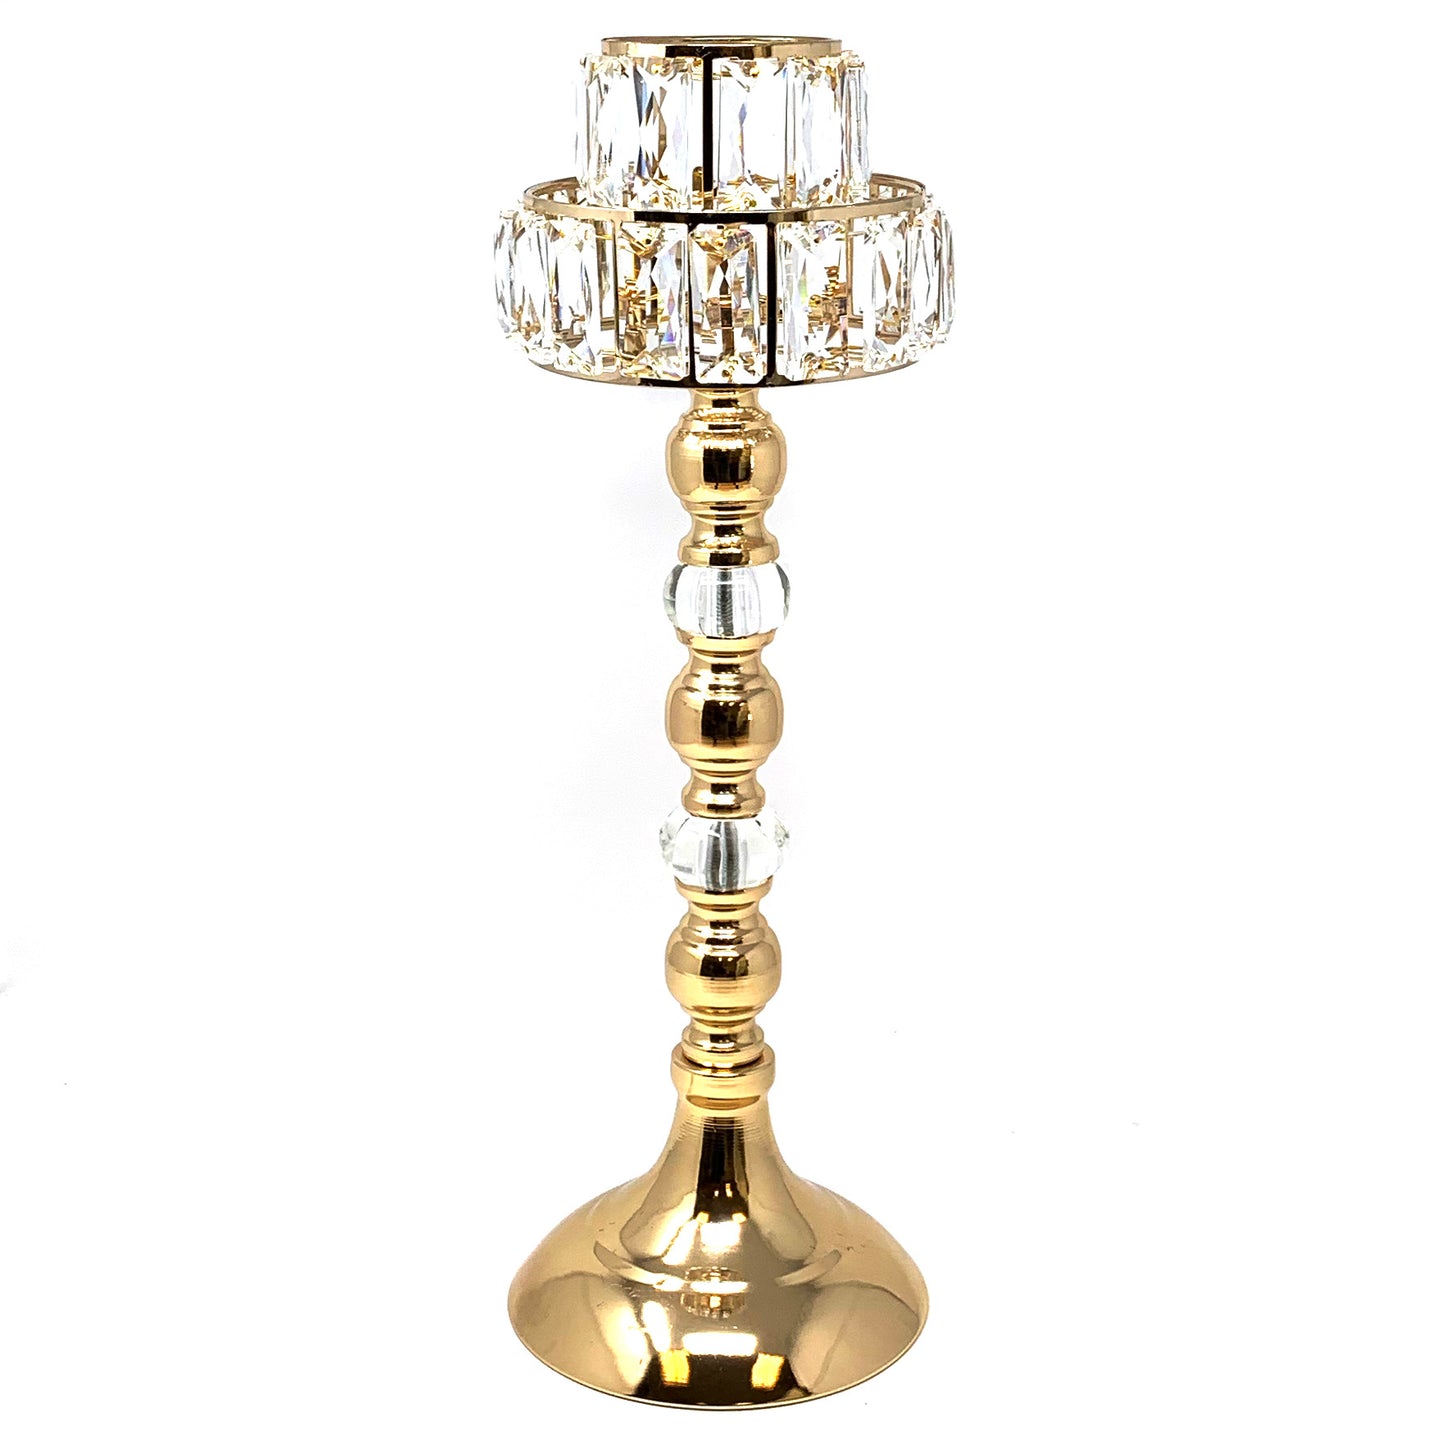 Allgala Candle Holder 19" Lamp Style Gold Tealight Candle Holder with Crystal Blocks